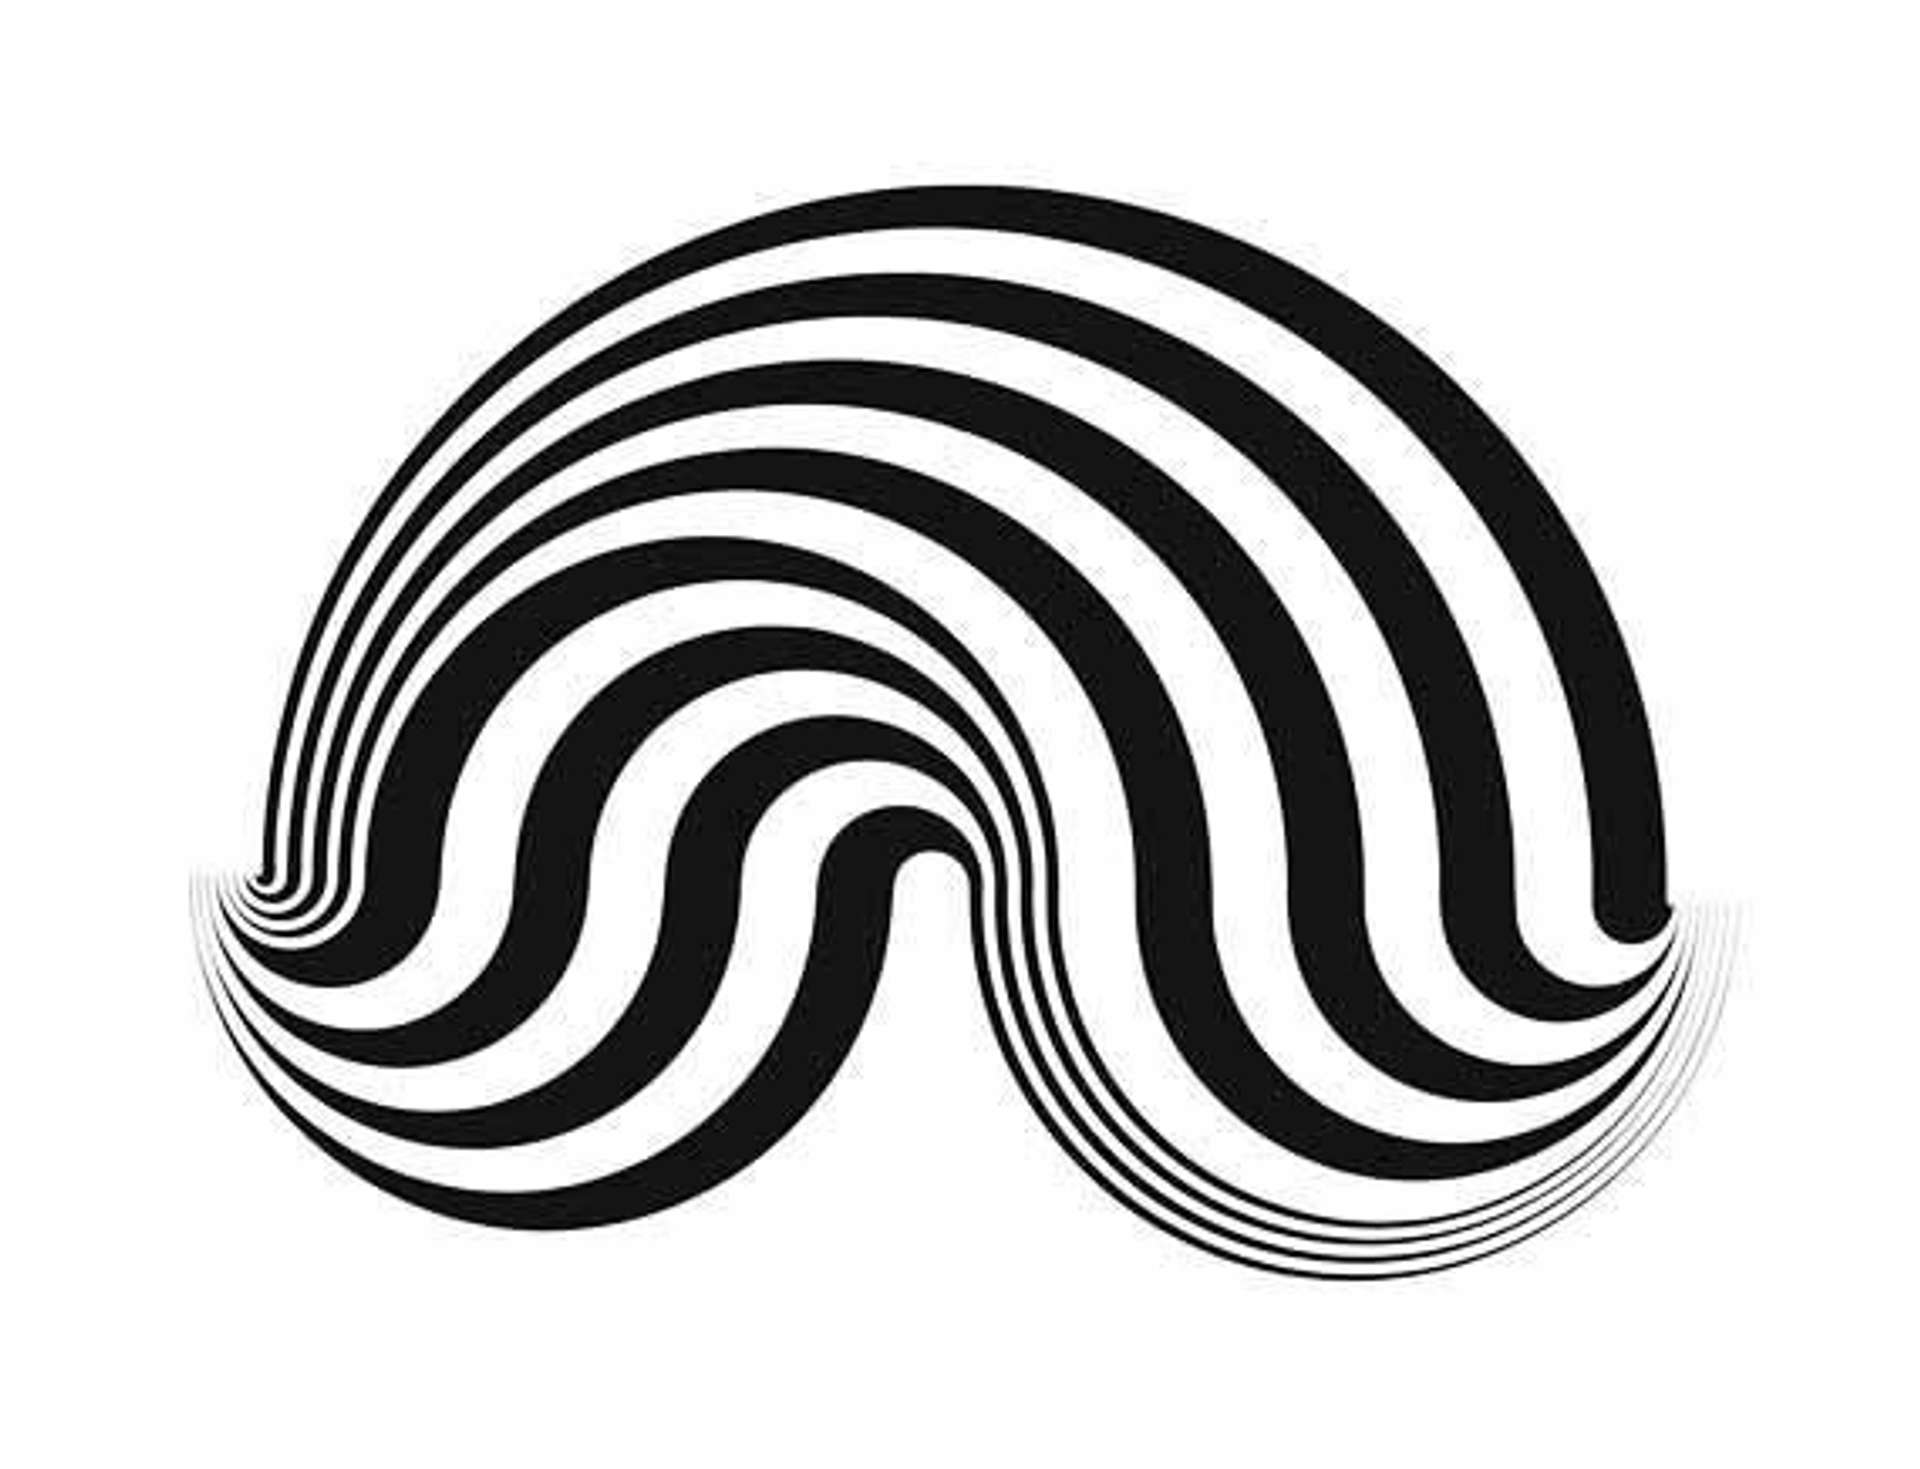 Bridget Riley’s Fragment 5. An Op Art screenprint of black and white lines curved in the style of a half circle.